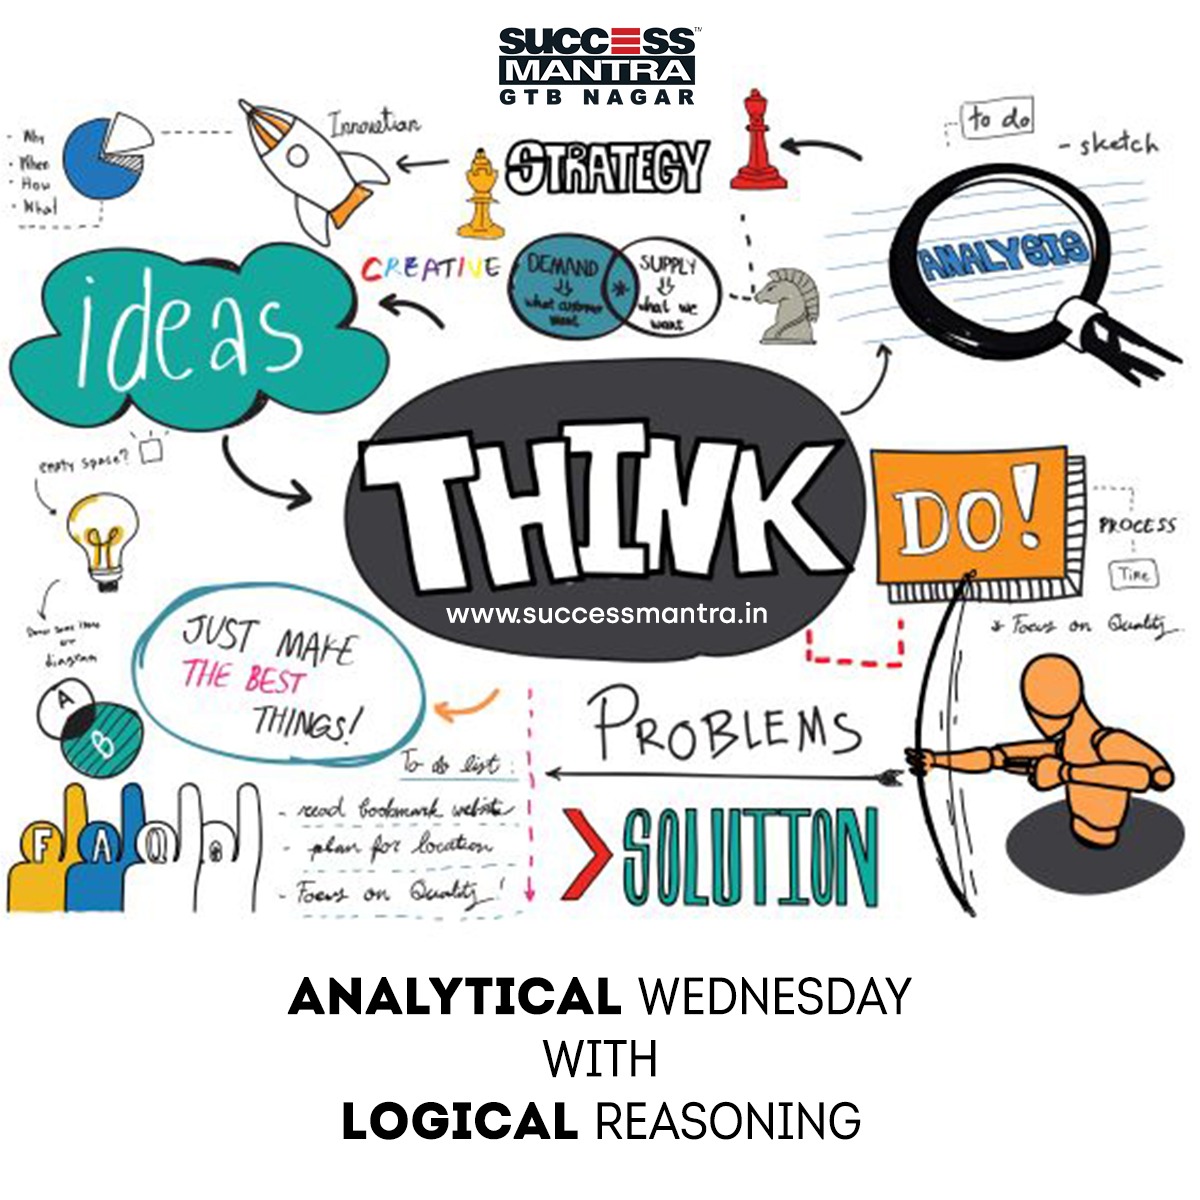 Questions on Logical Reasoning SMLRQ038